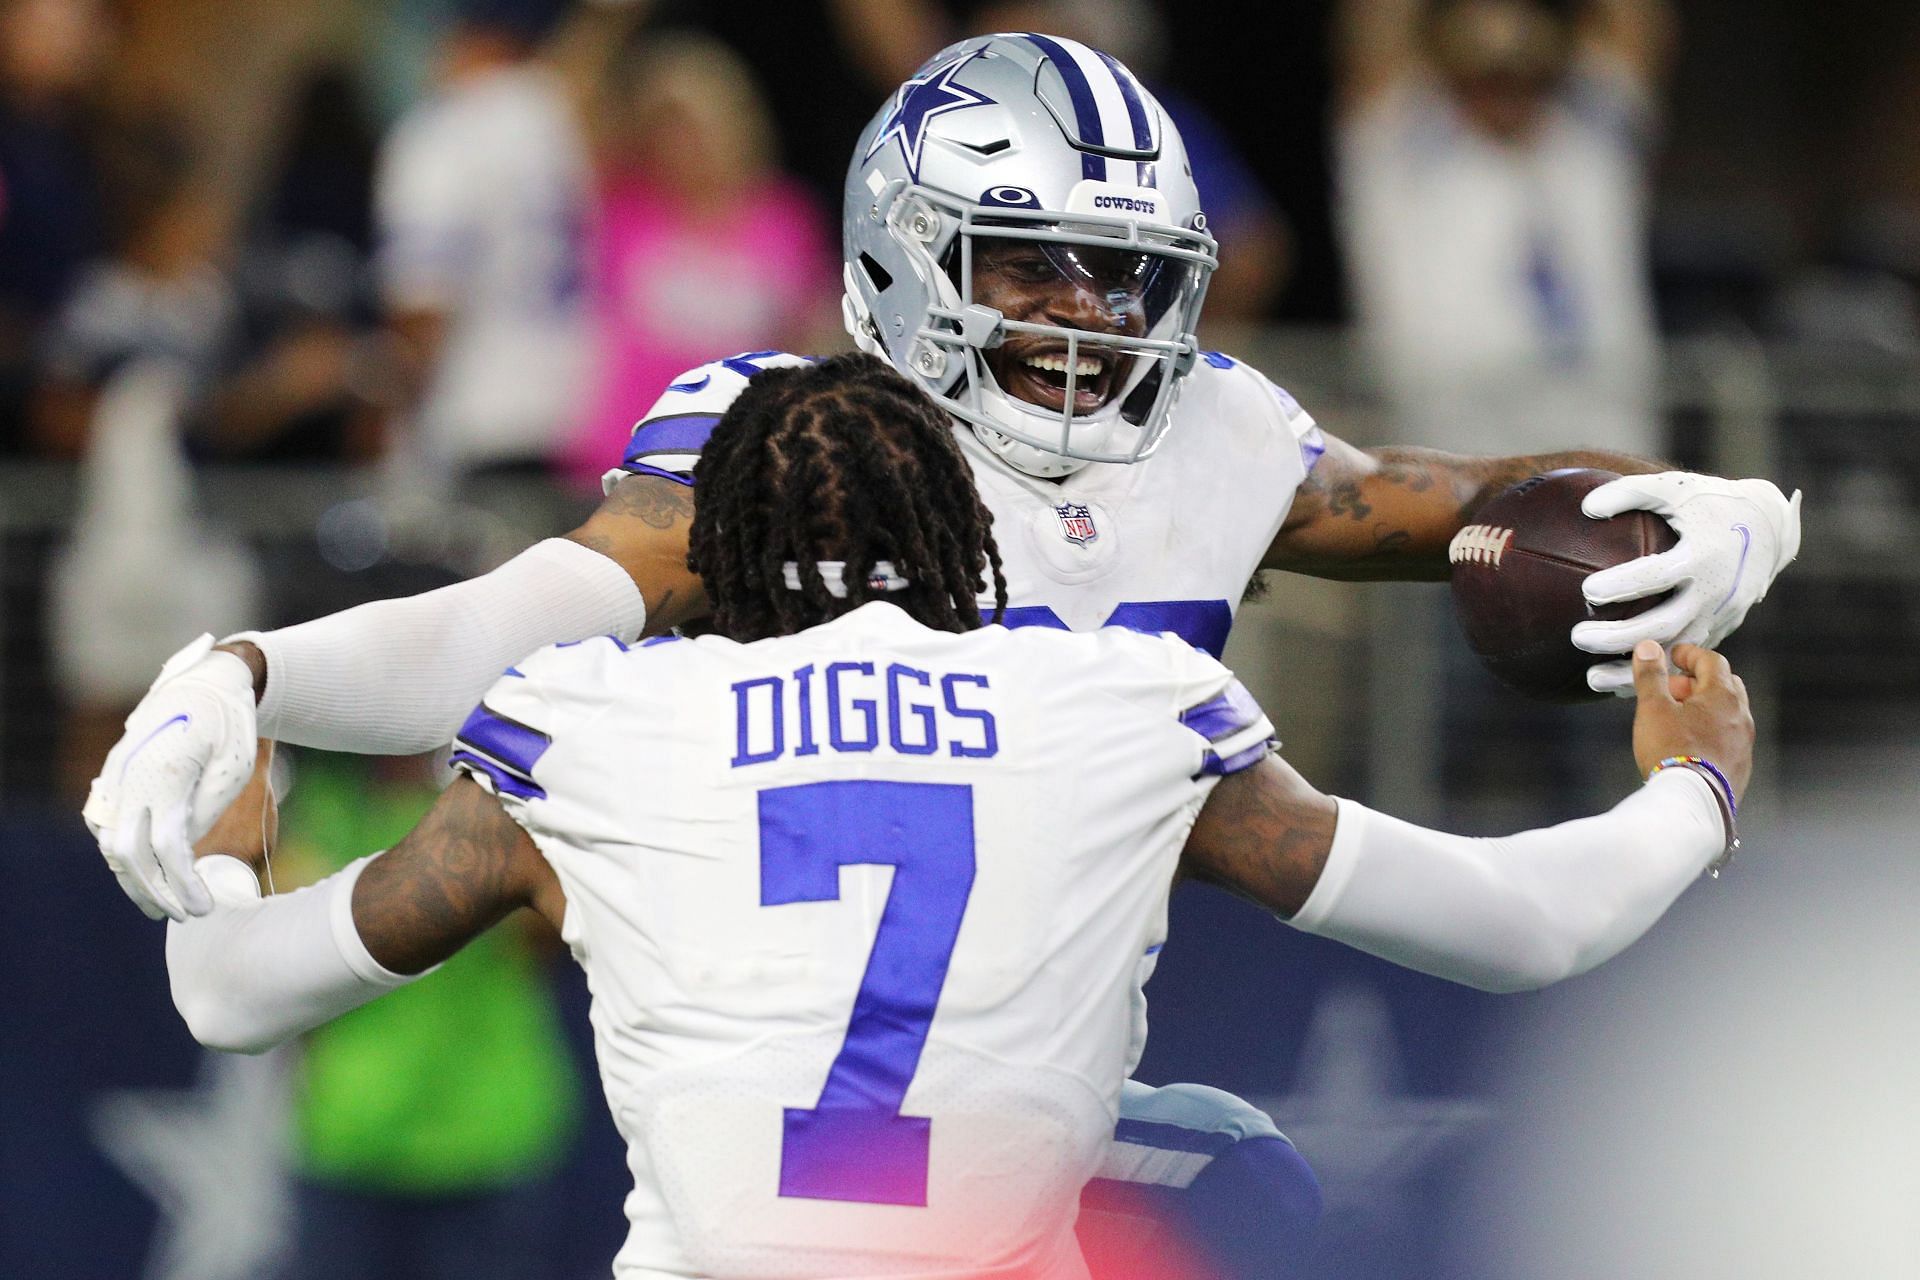 Cowboys CB Trevon Diggs' interception equals 28-year outdated document...